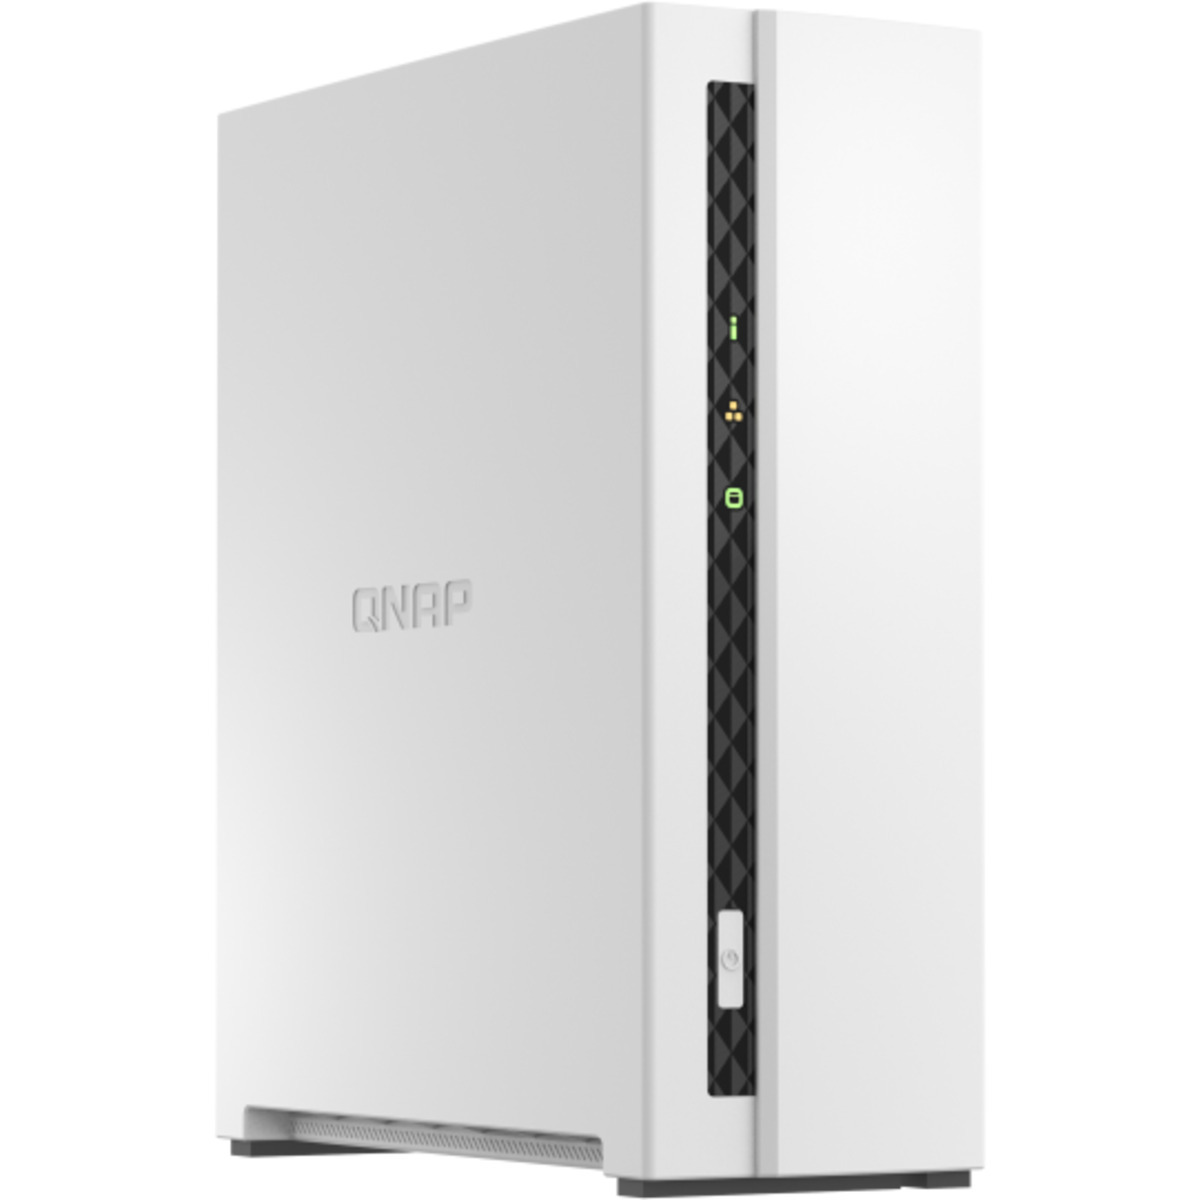 QNAP TS-133 18tb 1-Bay Desktop Personal / Basic Home / Small Office NAS - Network Attached Storage Device 1x18tb Seagate IronWolf Pro ST18000NT001 3.5 7200rpm SATA 6Gb/s HDD NAS Class Drives Installed - Burn-In Tested TS-133